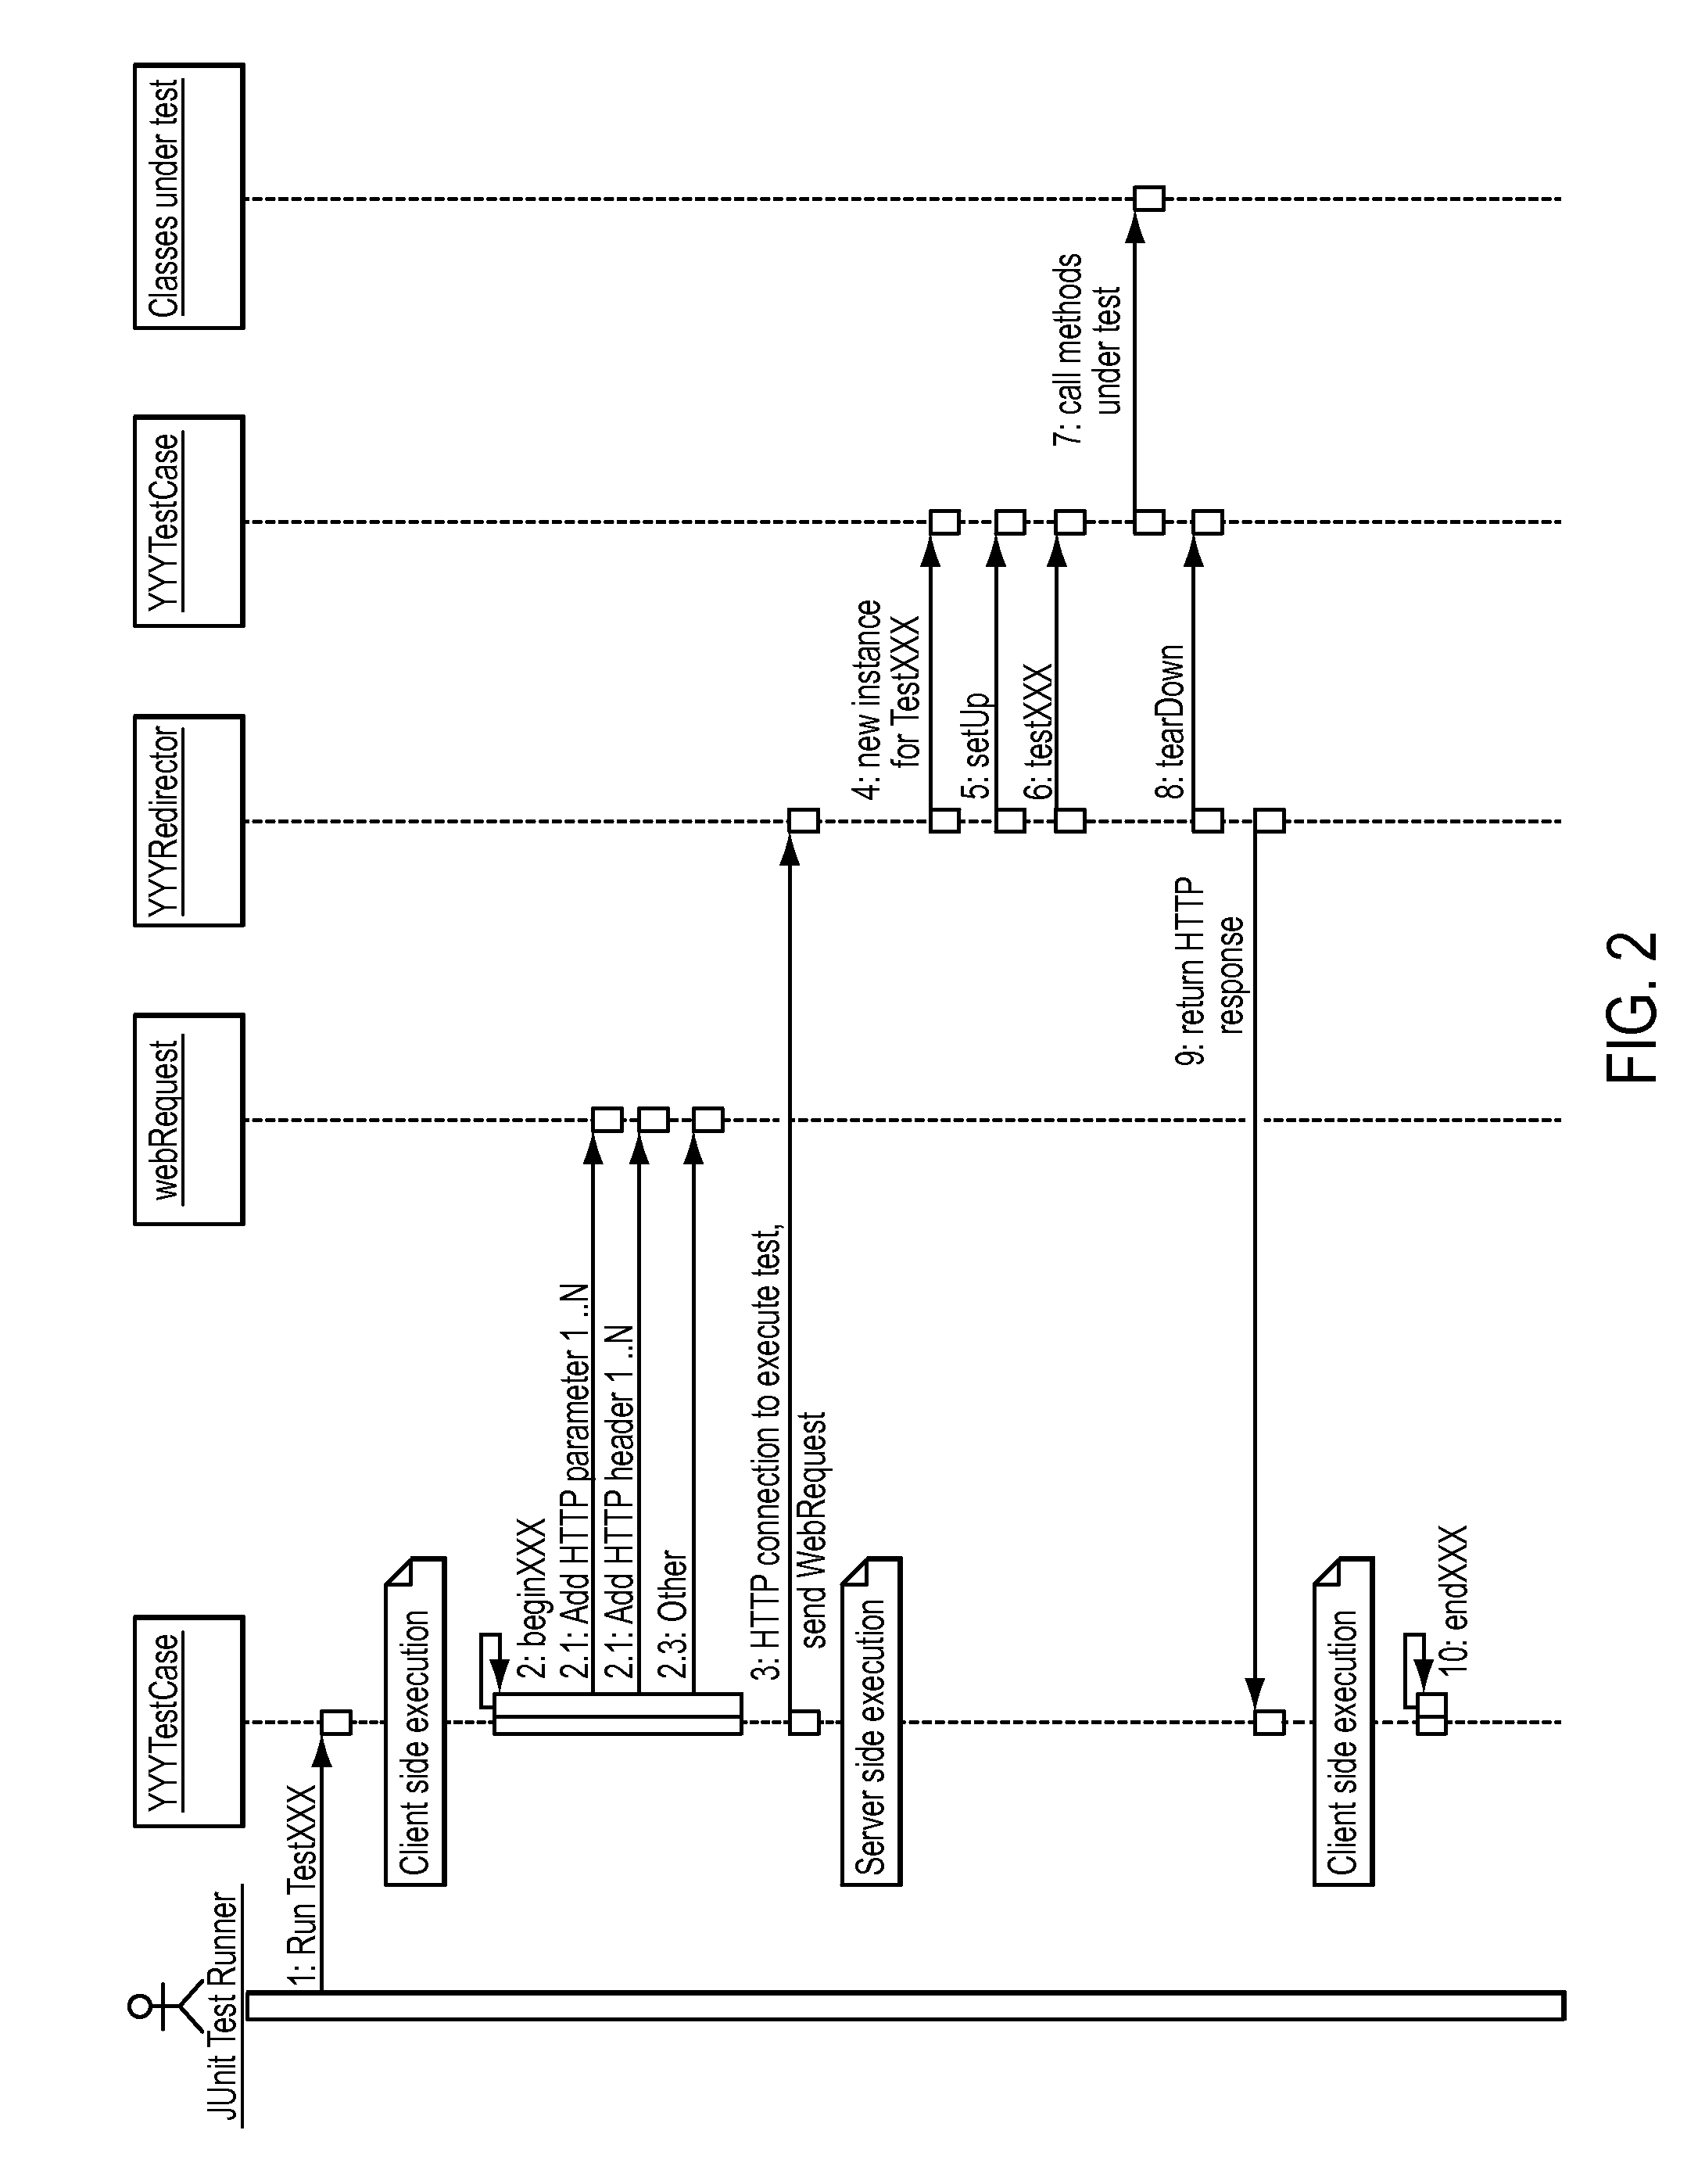 Method and apparatus for transaction recording and visualization